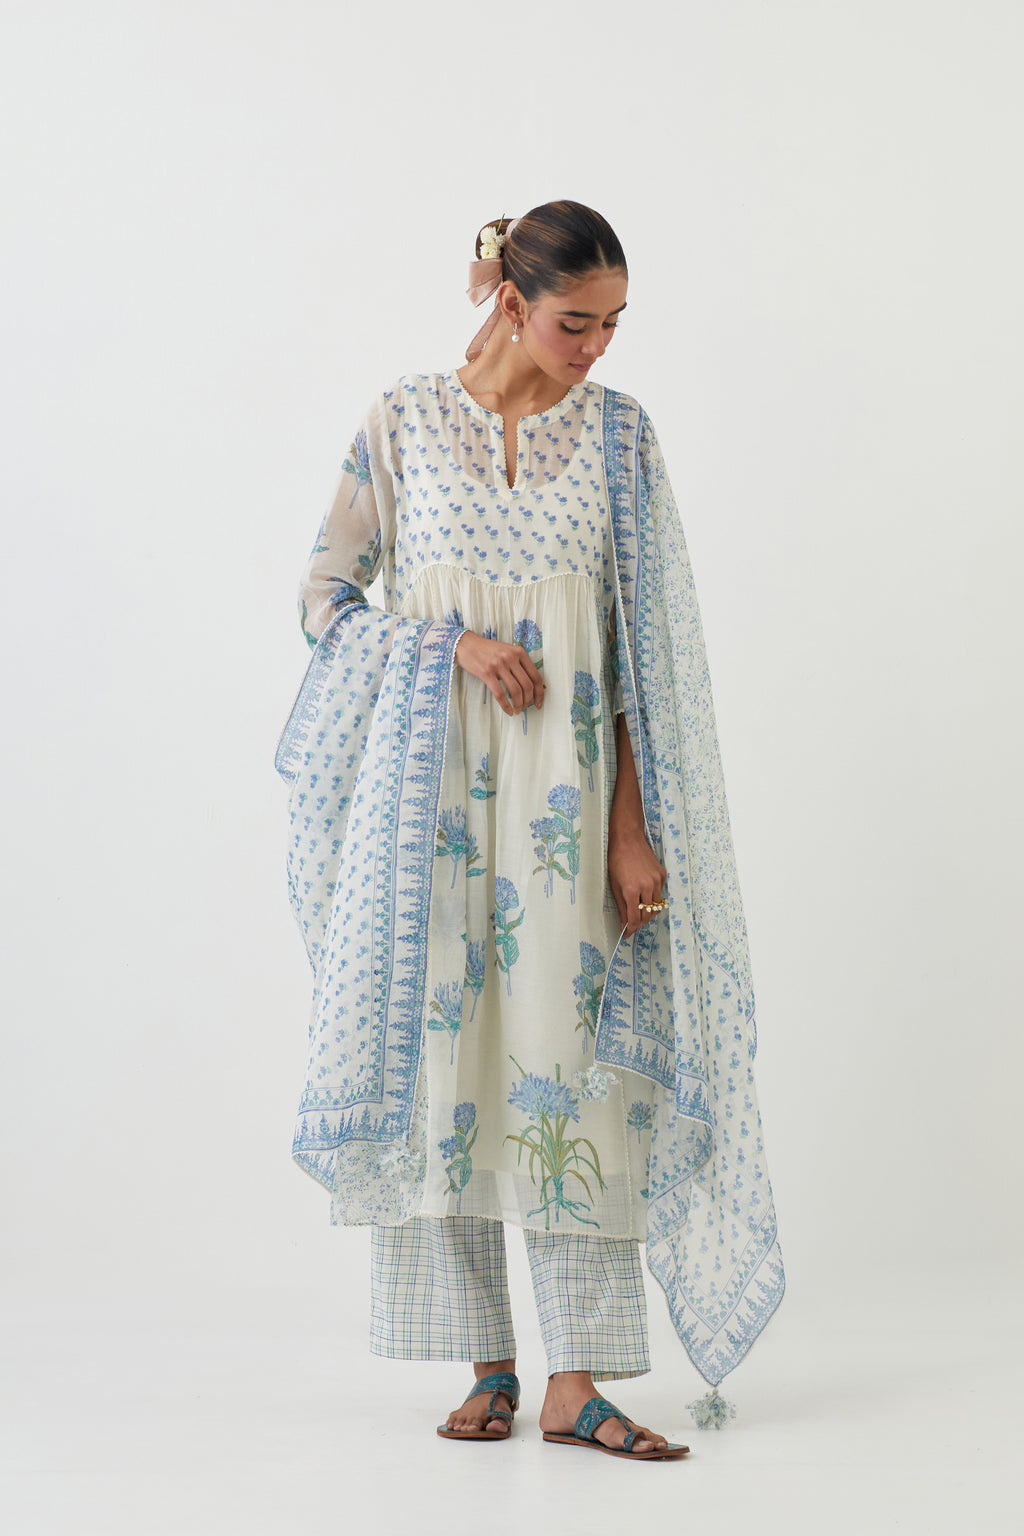 Off white cotton chanderi Kurta dress set  with all-over assorted blue colored floral hand block print.